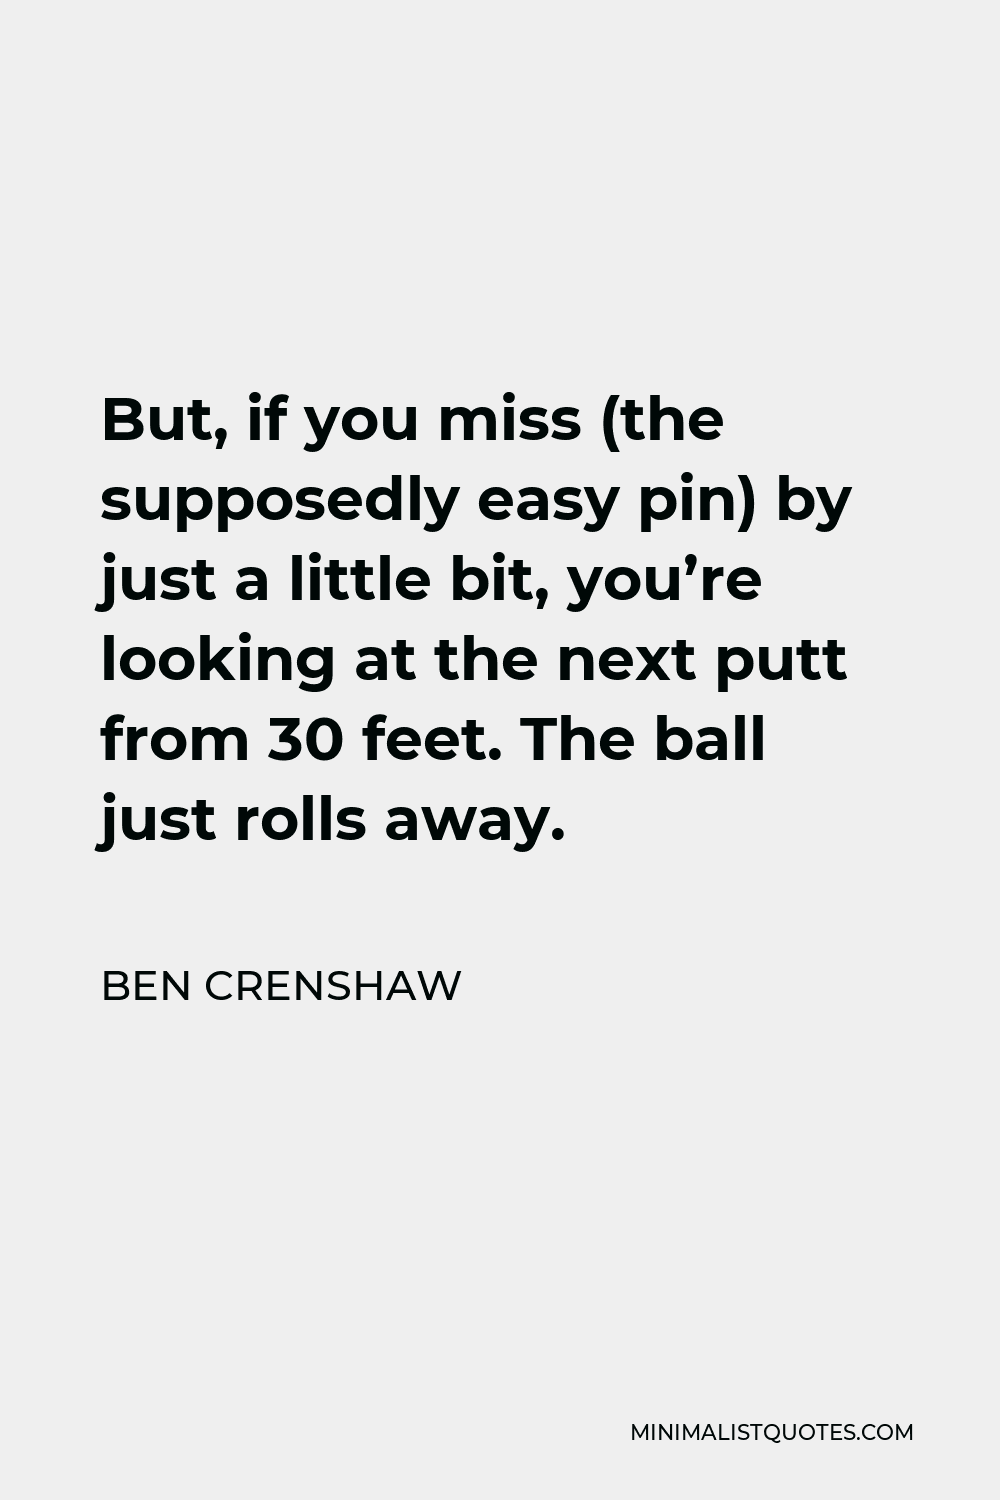 Ben Crenshaw Quote - But, if you miss (the supposedly easy pin) by just a little bit, you’re looking at the next putt from 30 feet. The ball just rolls away.